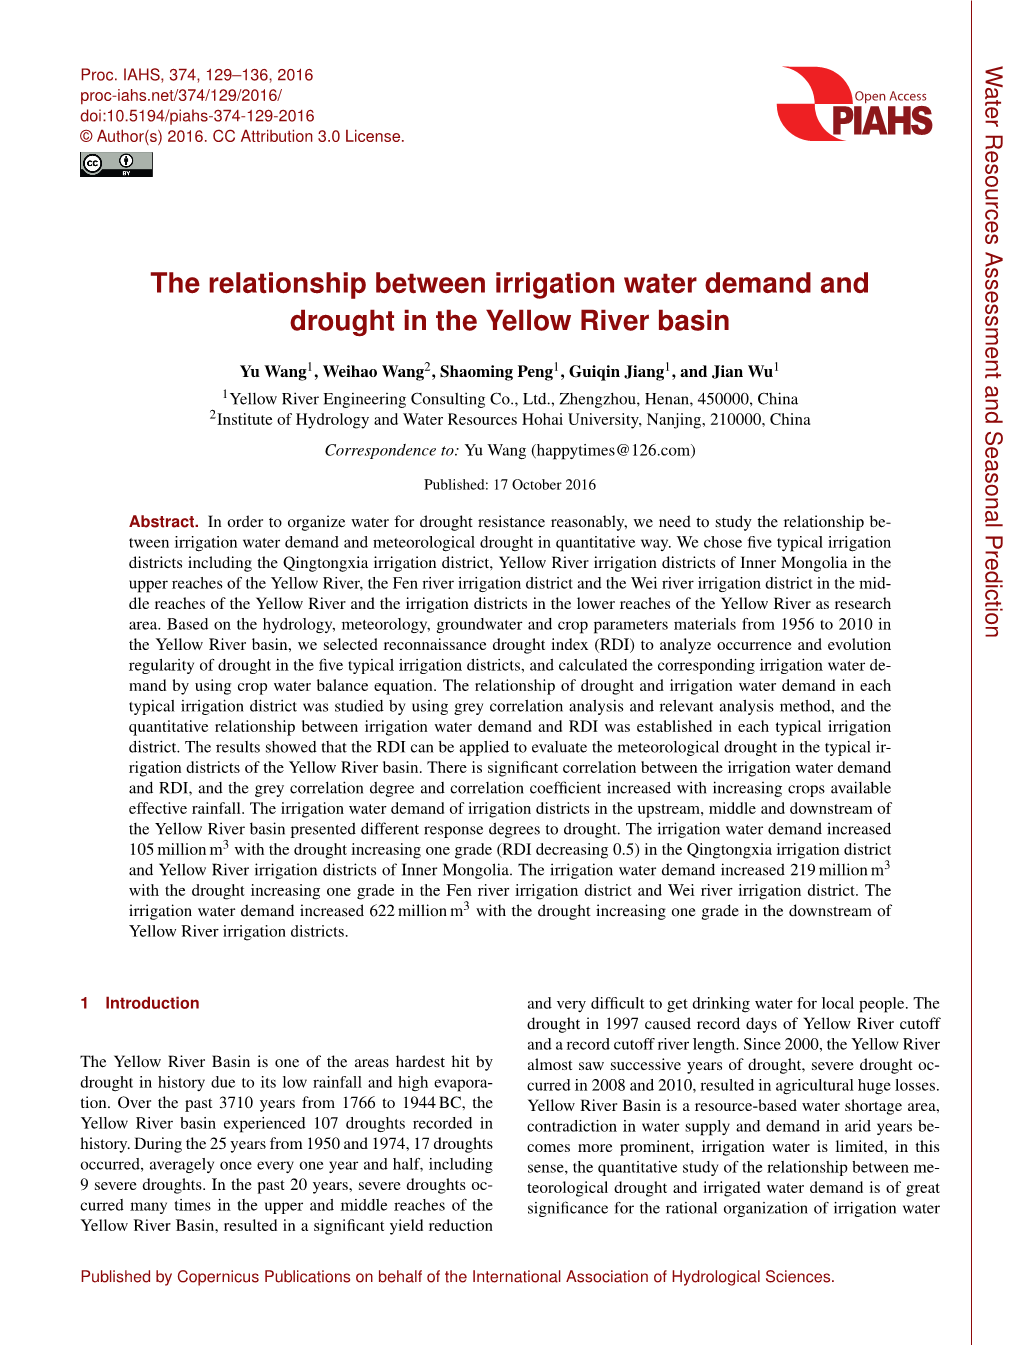 The Relationship Between Irrigation Water Demand and Drought in the Yellow River Basin